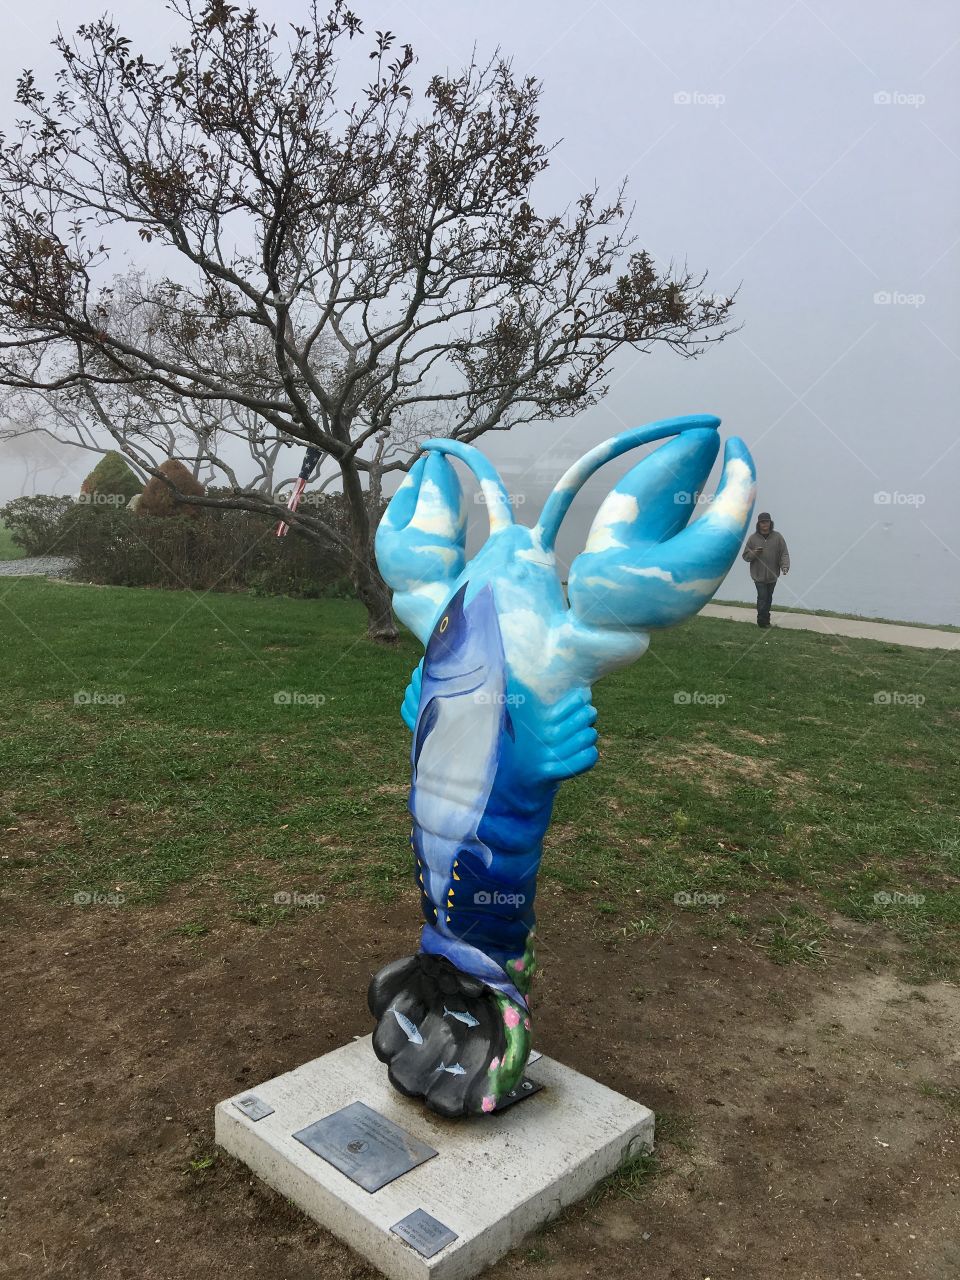 Lobster original artwork creation along Plymouth, MA tourist ocean front. Fog covered.